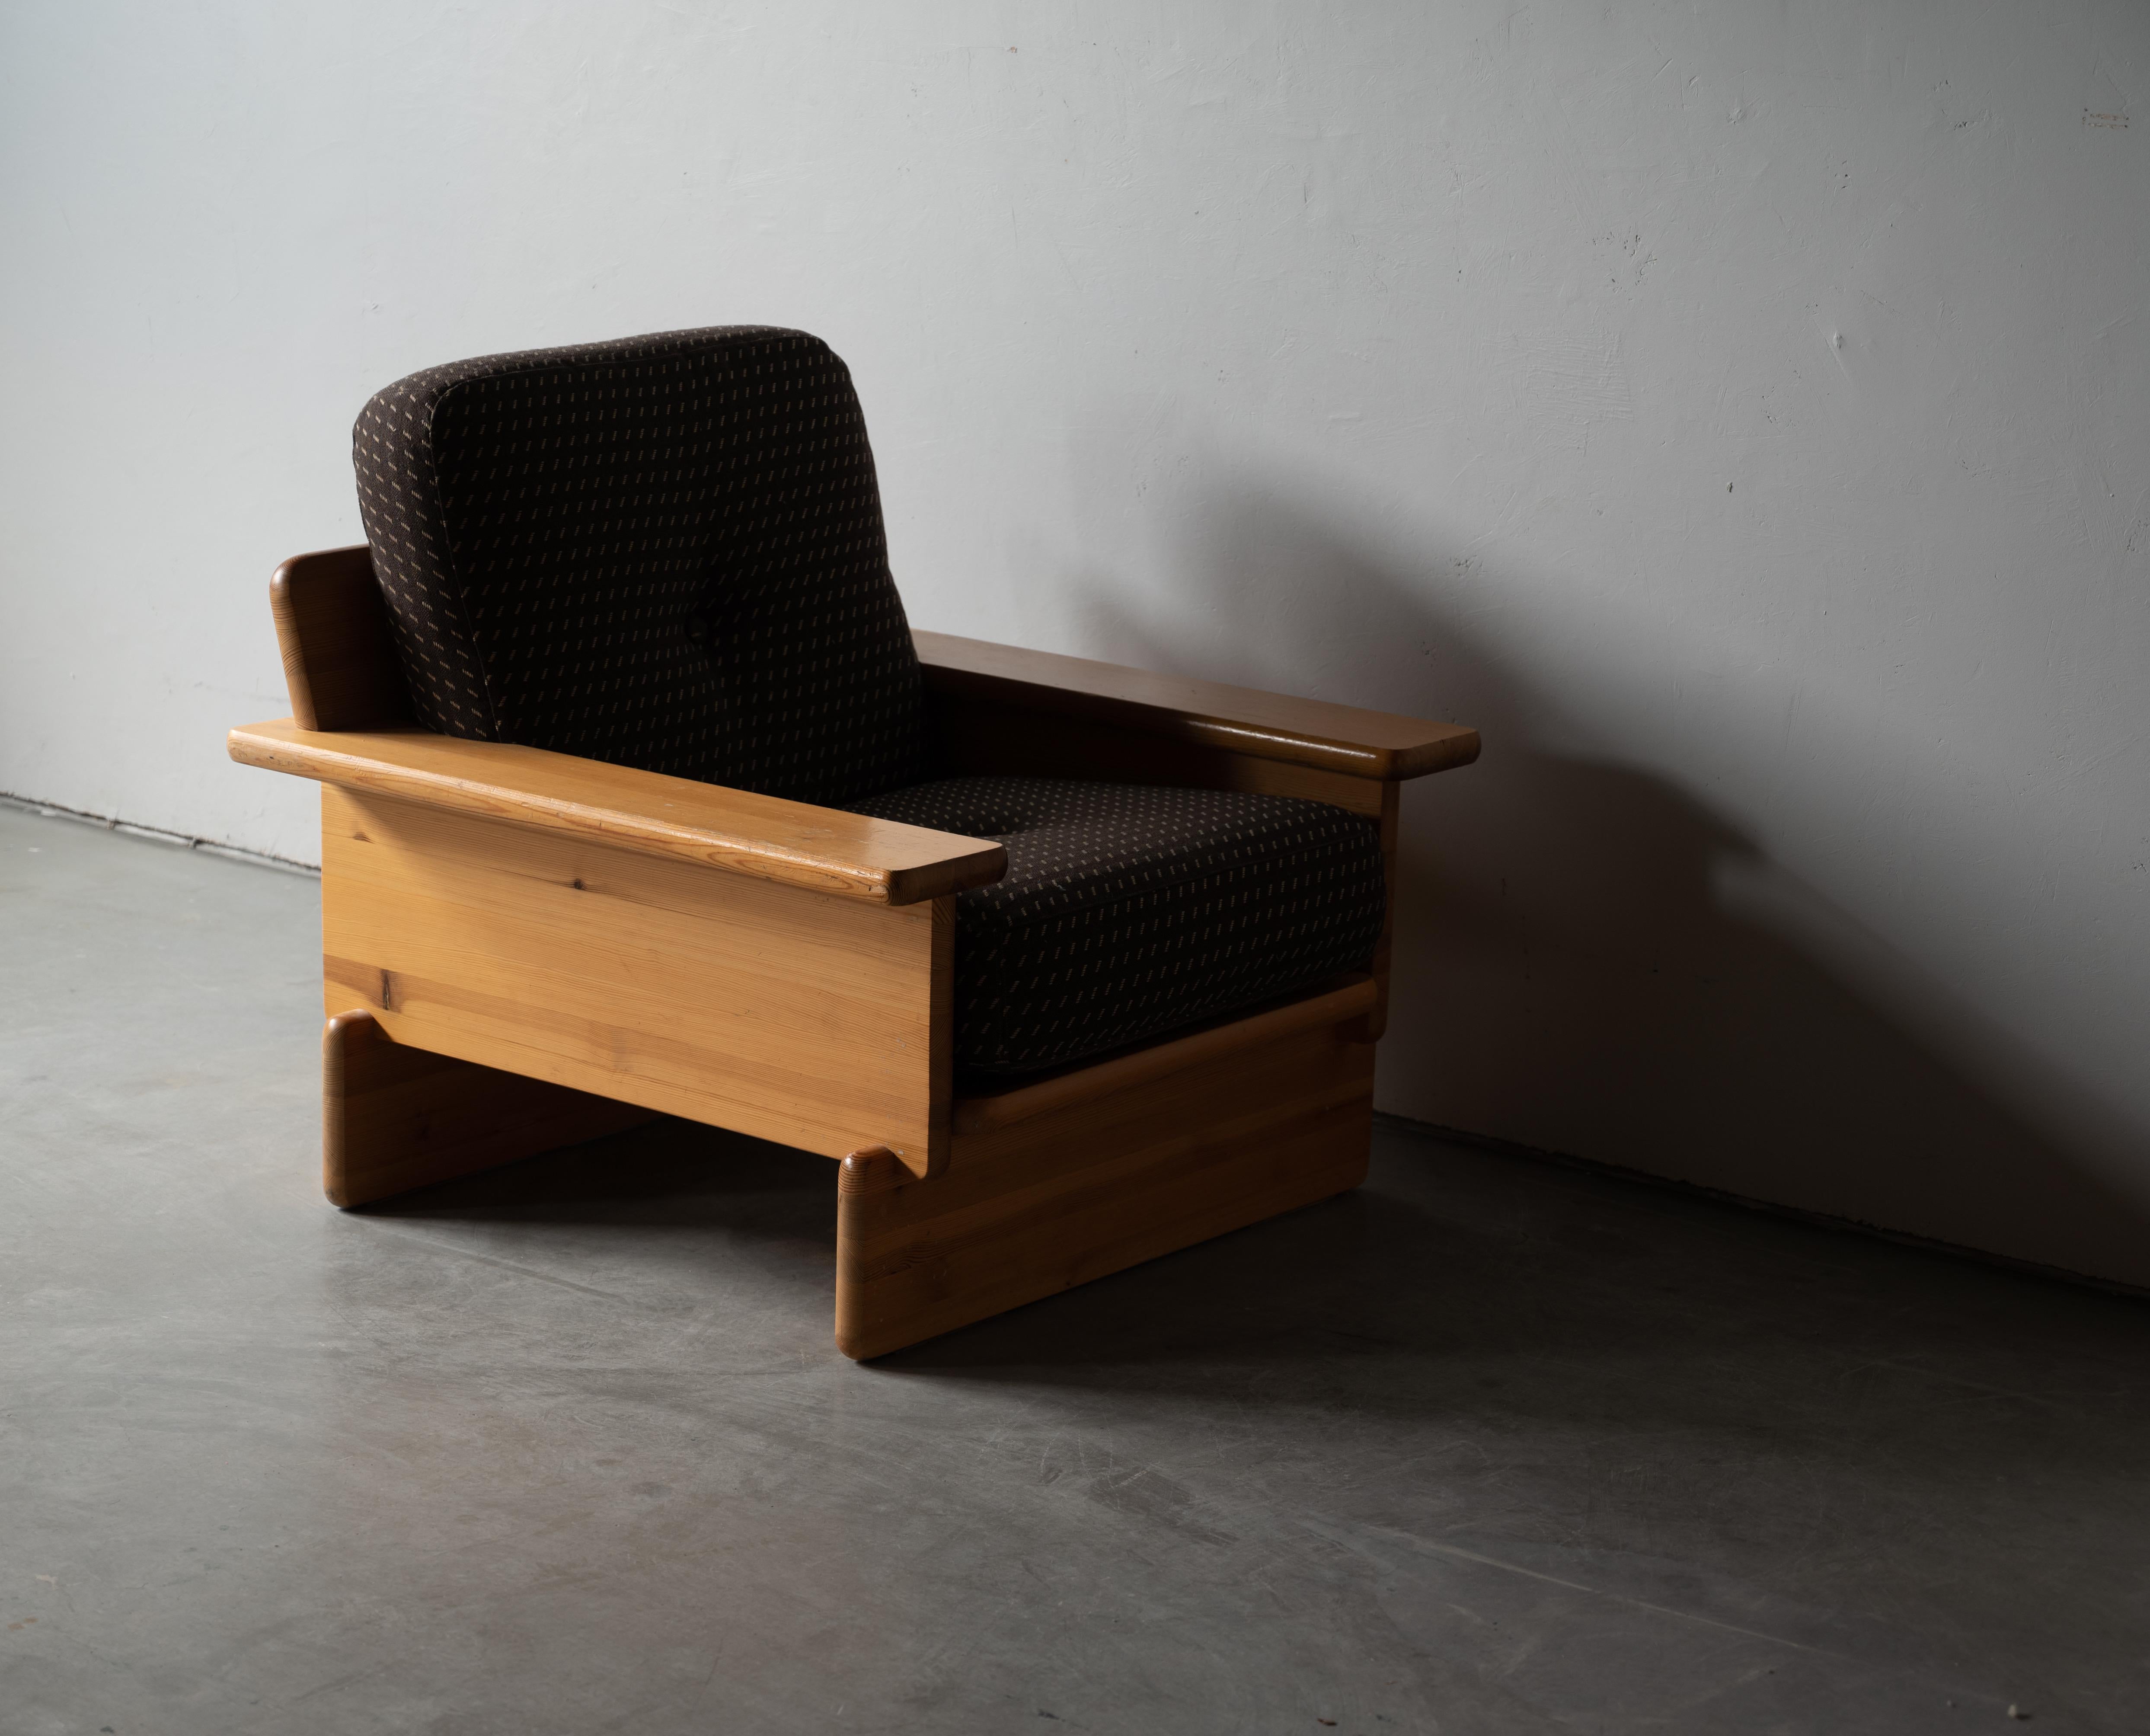 Bouclé Swedish Cabinetmaker, Lounge Chairs, Solid Pine, Brown Fabric, Finland, c. 1970s